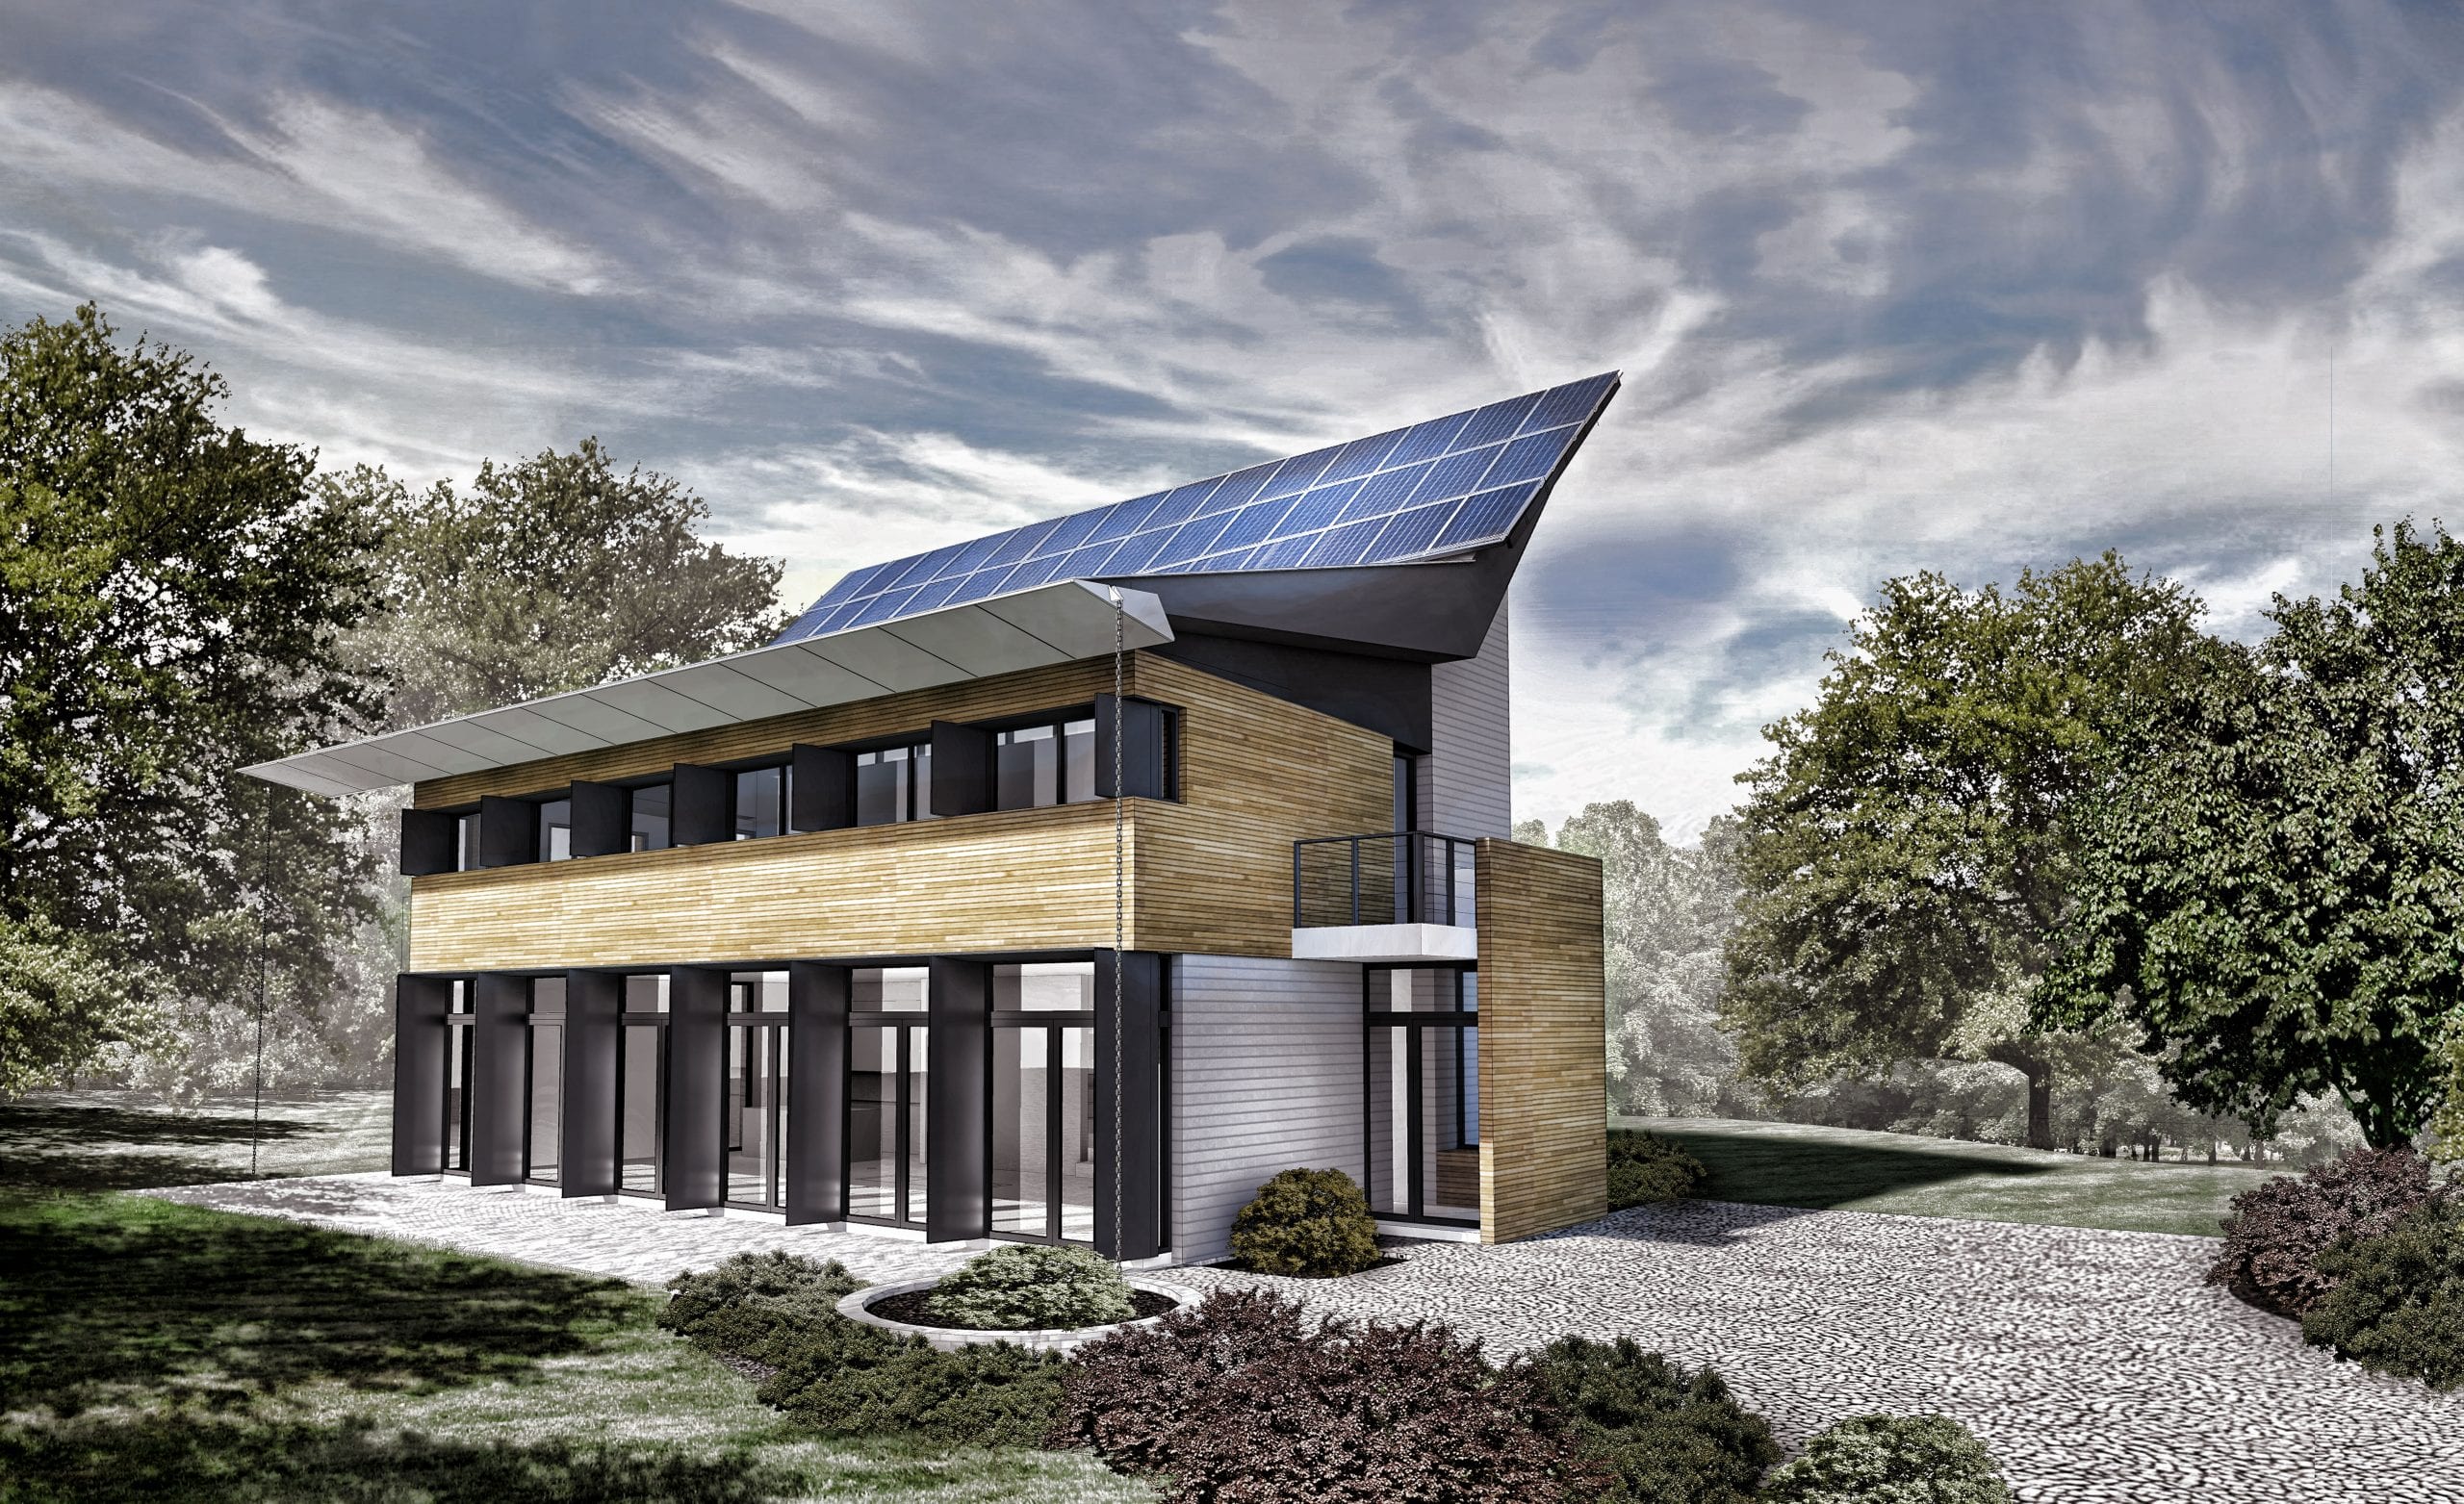 Rendering of a house with solar panels